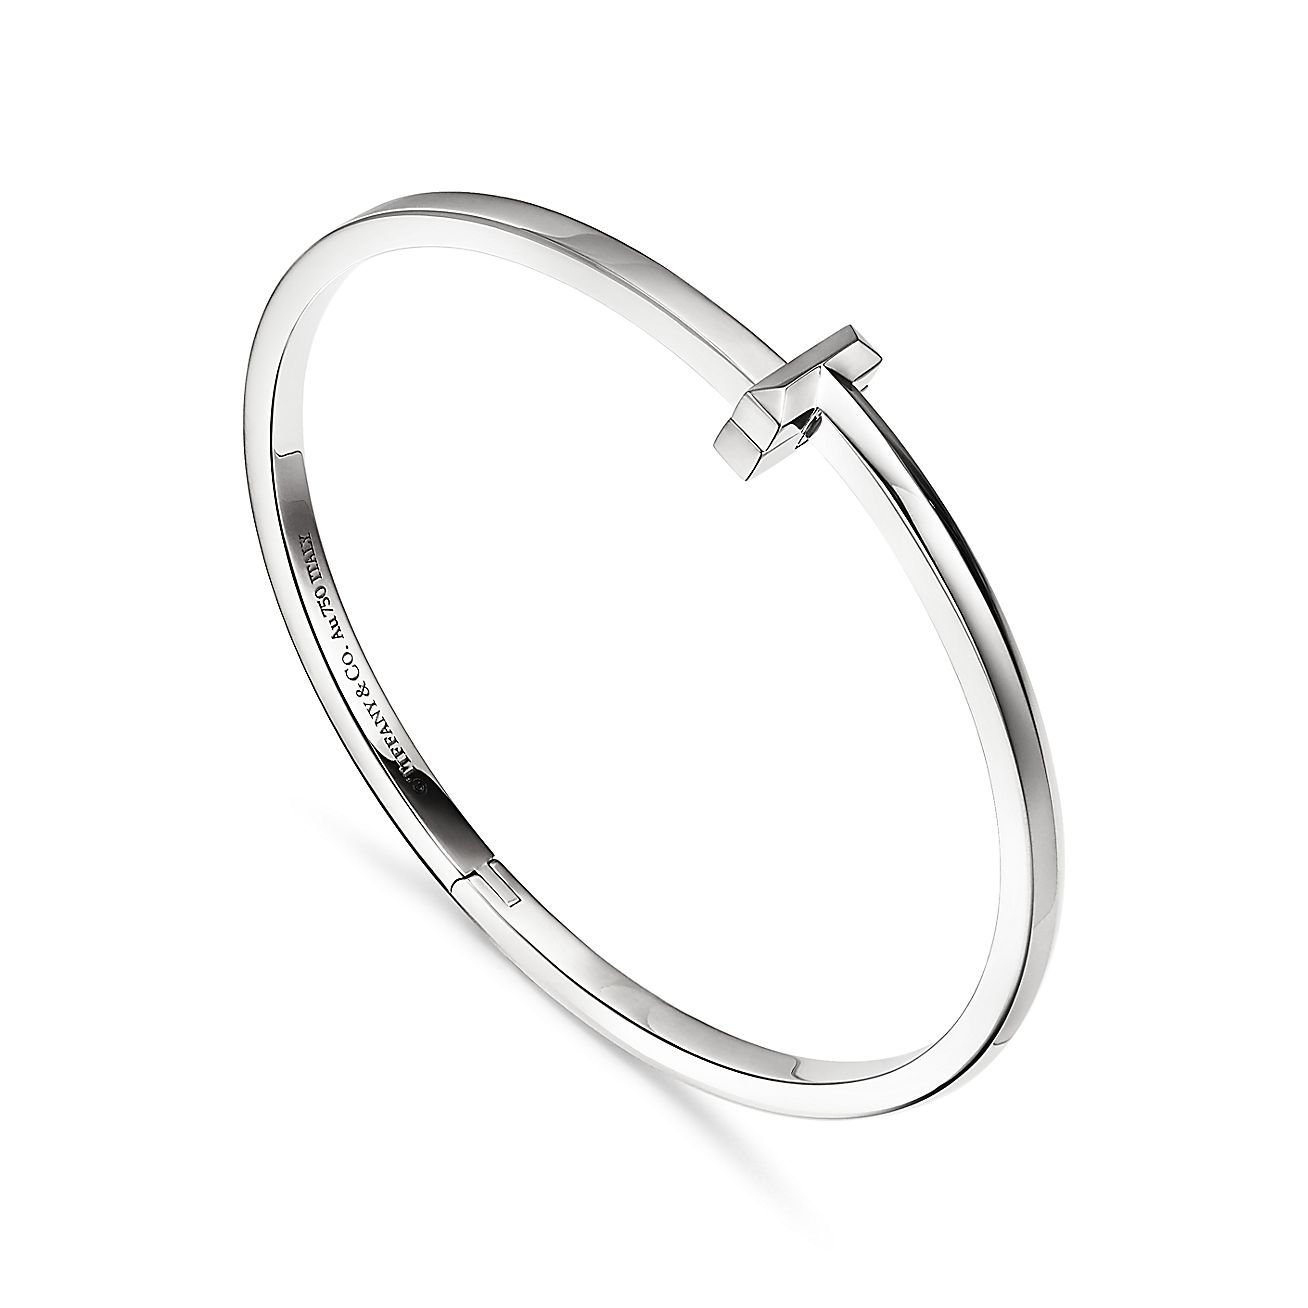 The Secret to Fitting a Small Bangle Over a Wide Hand – Between